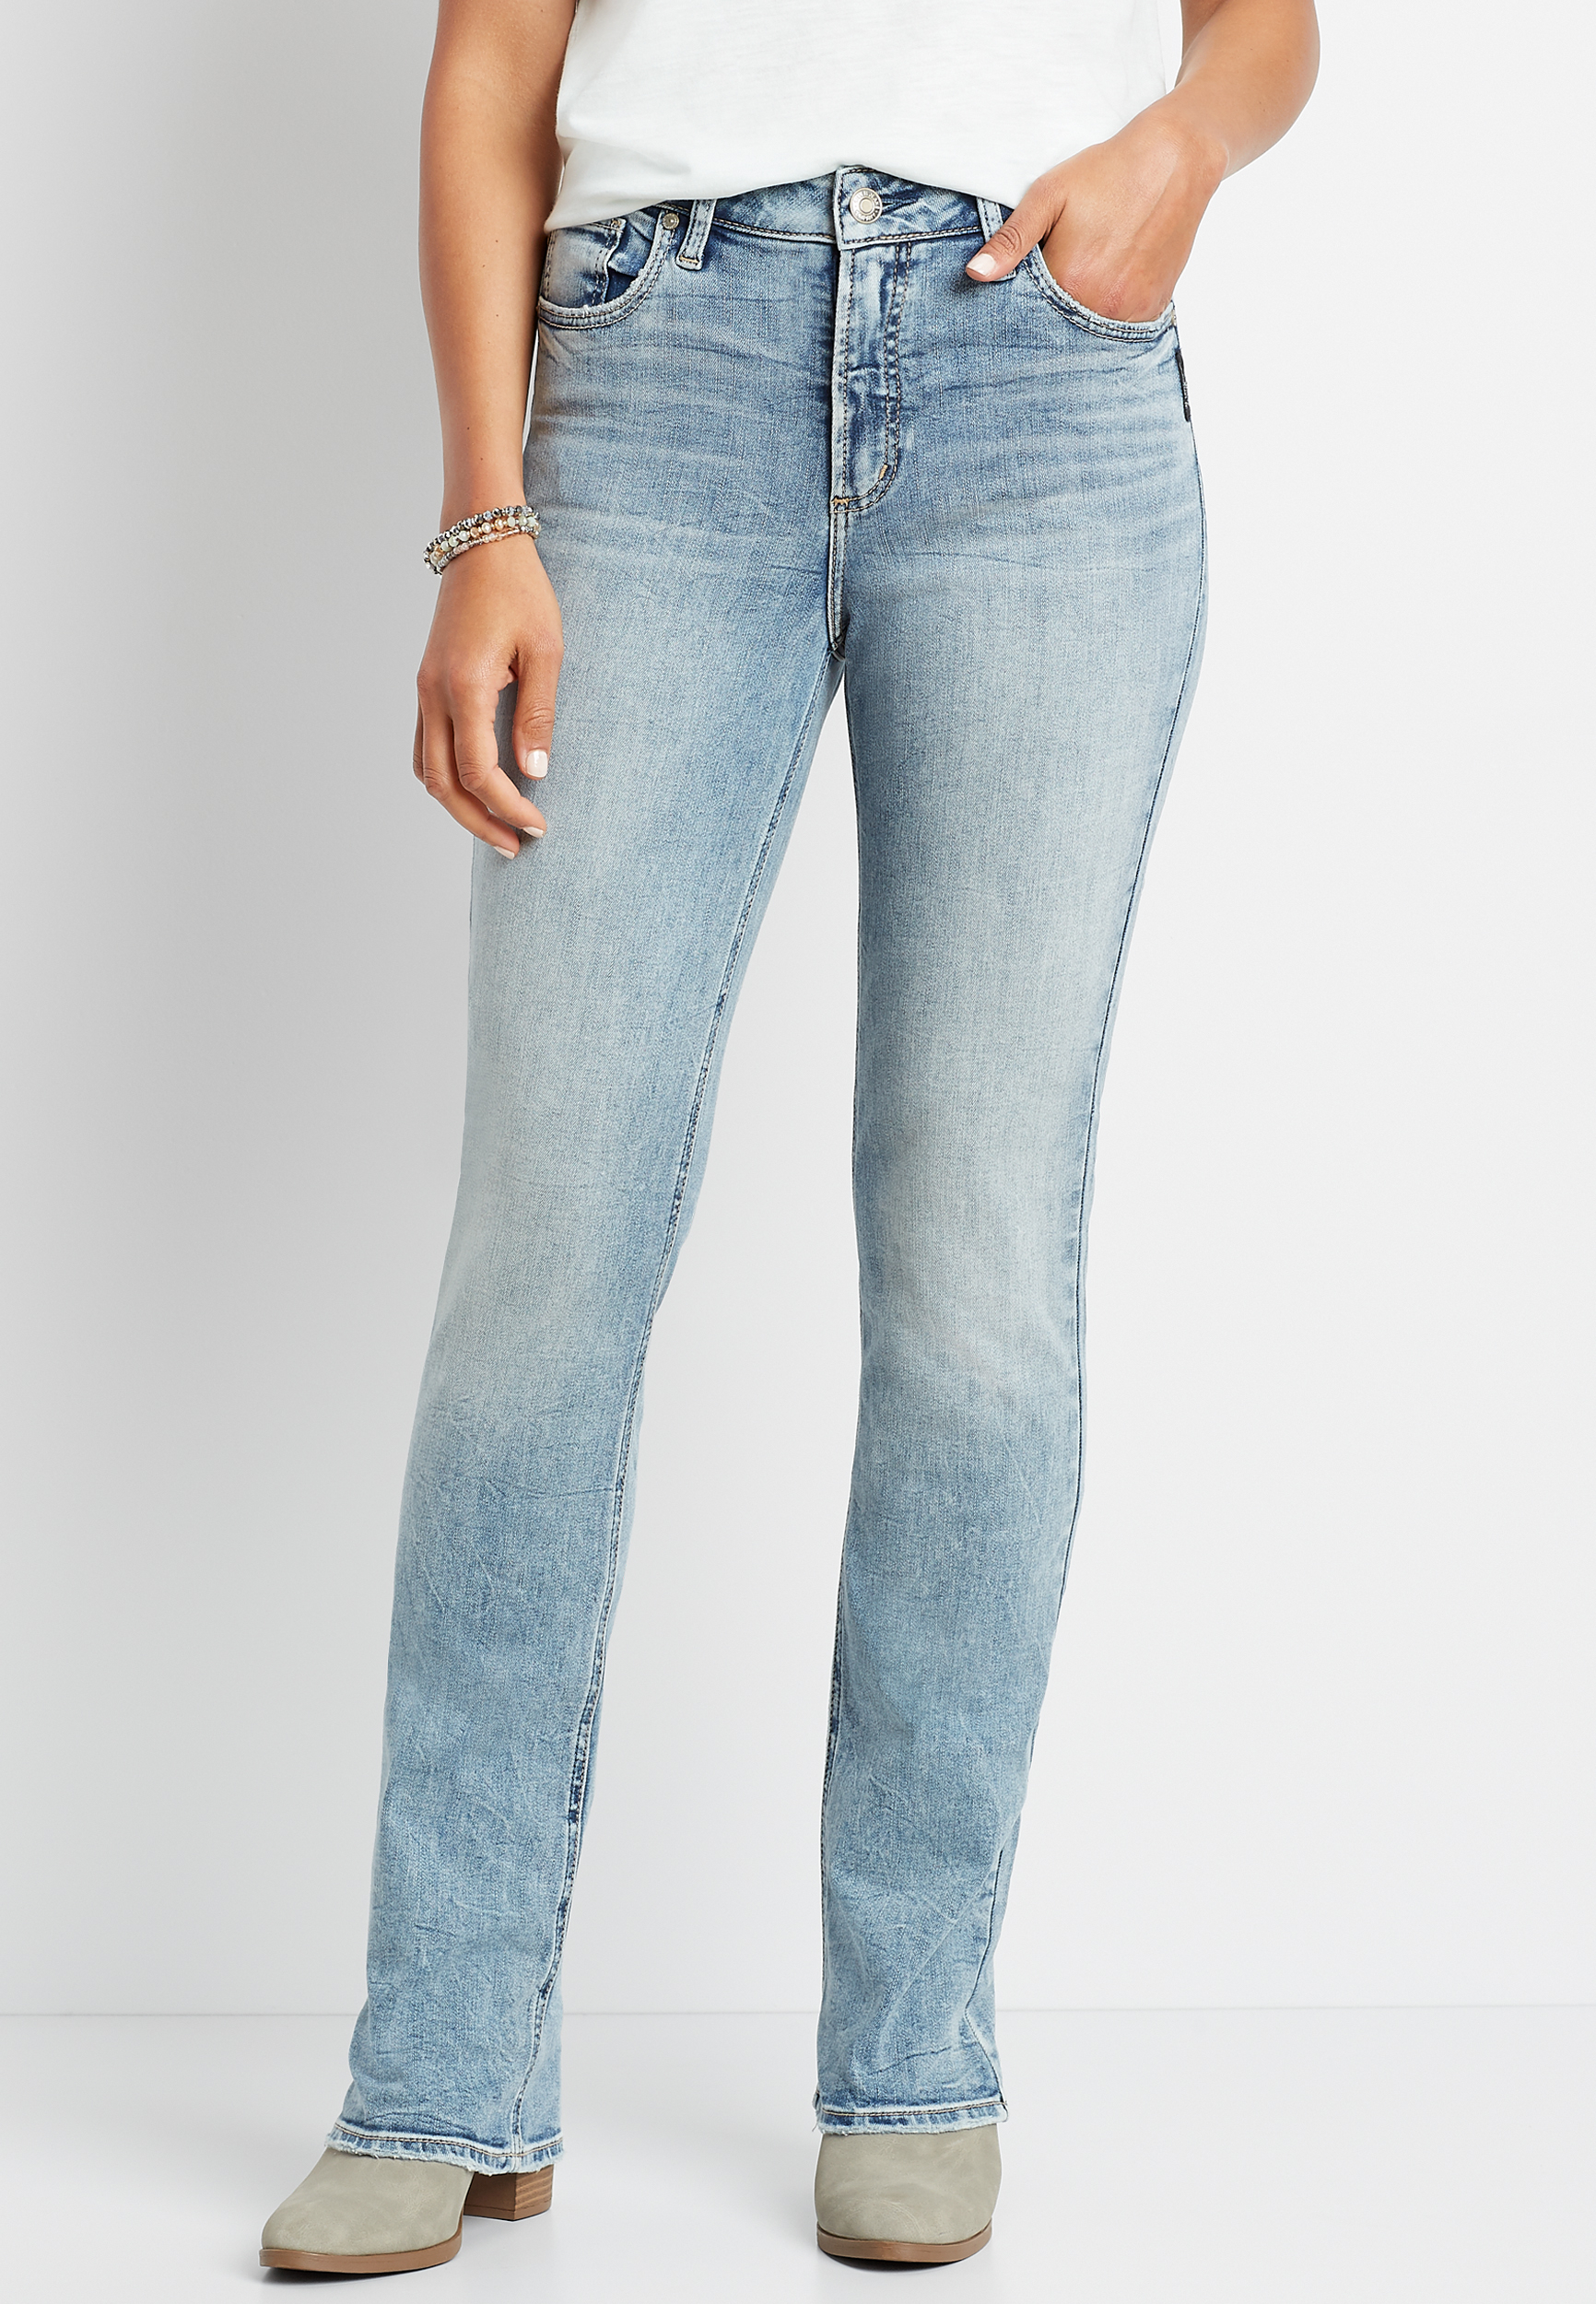 marble wash jeans